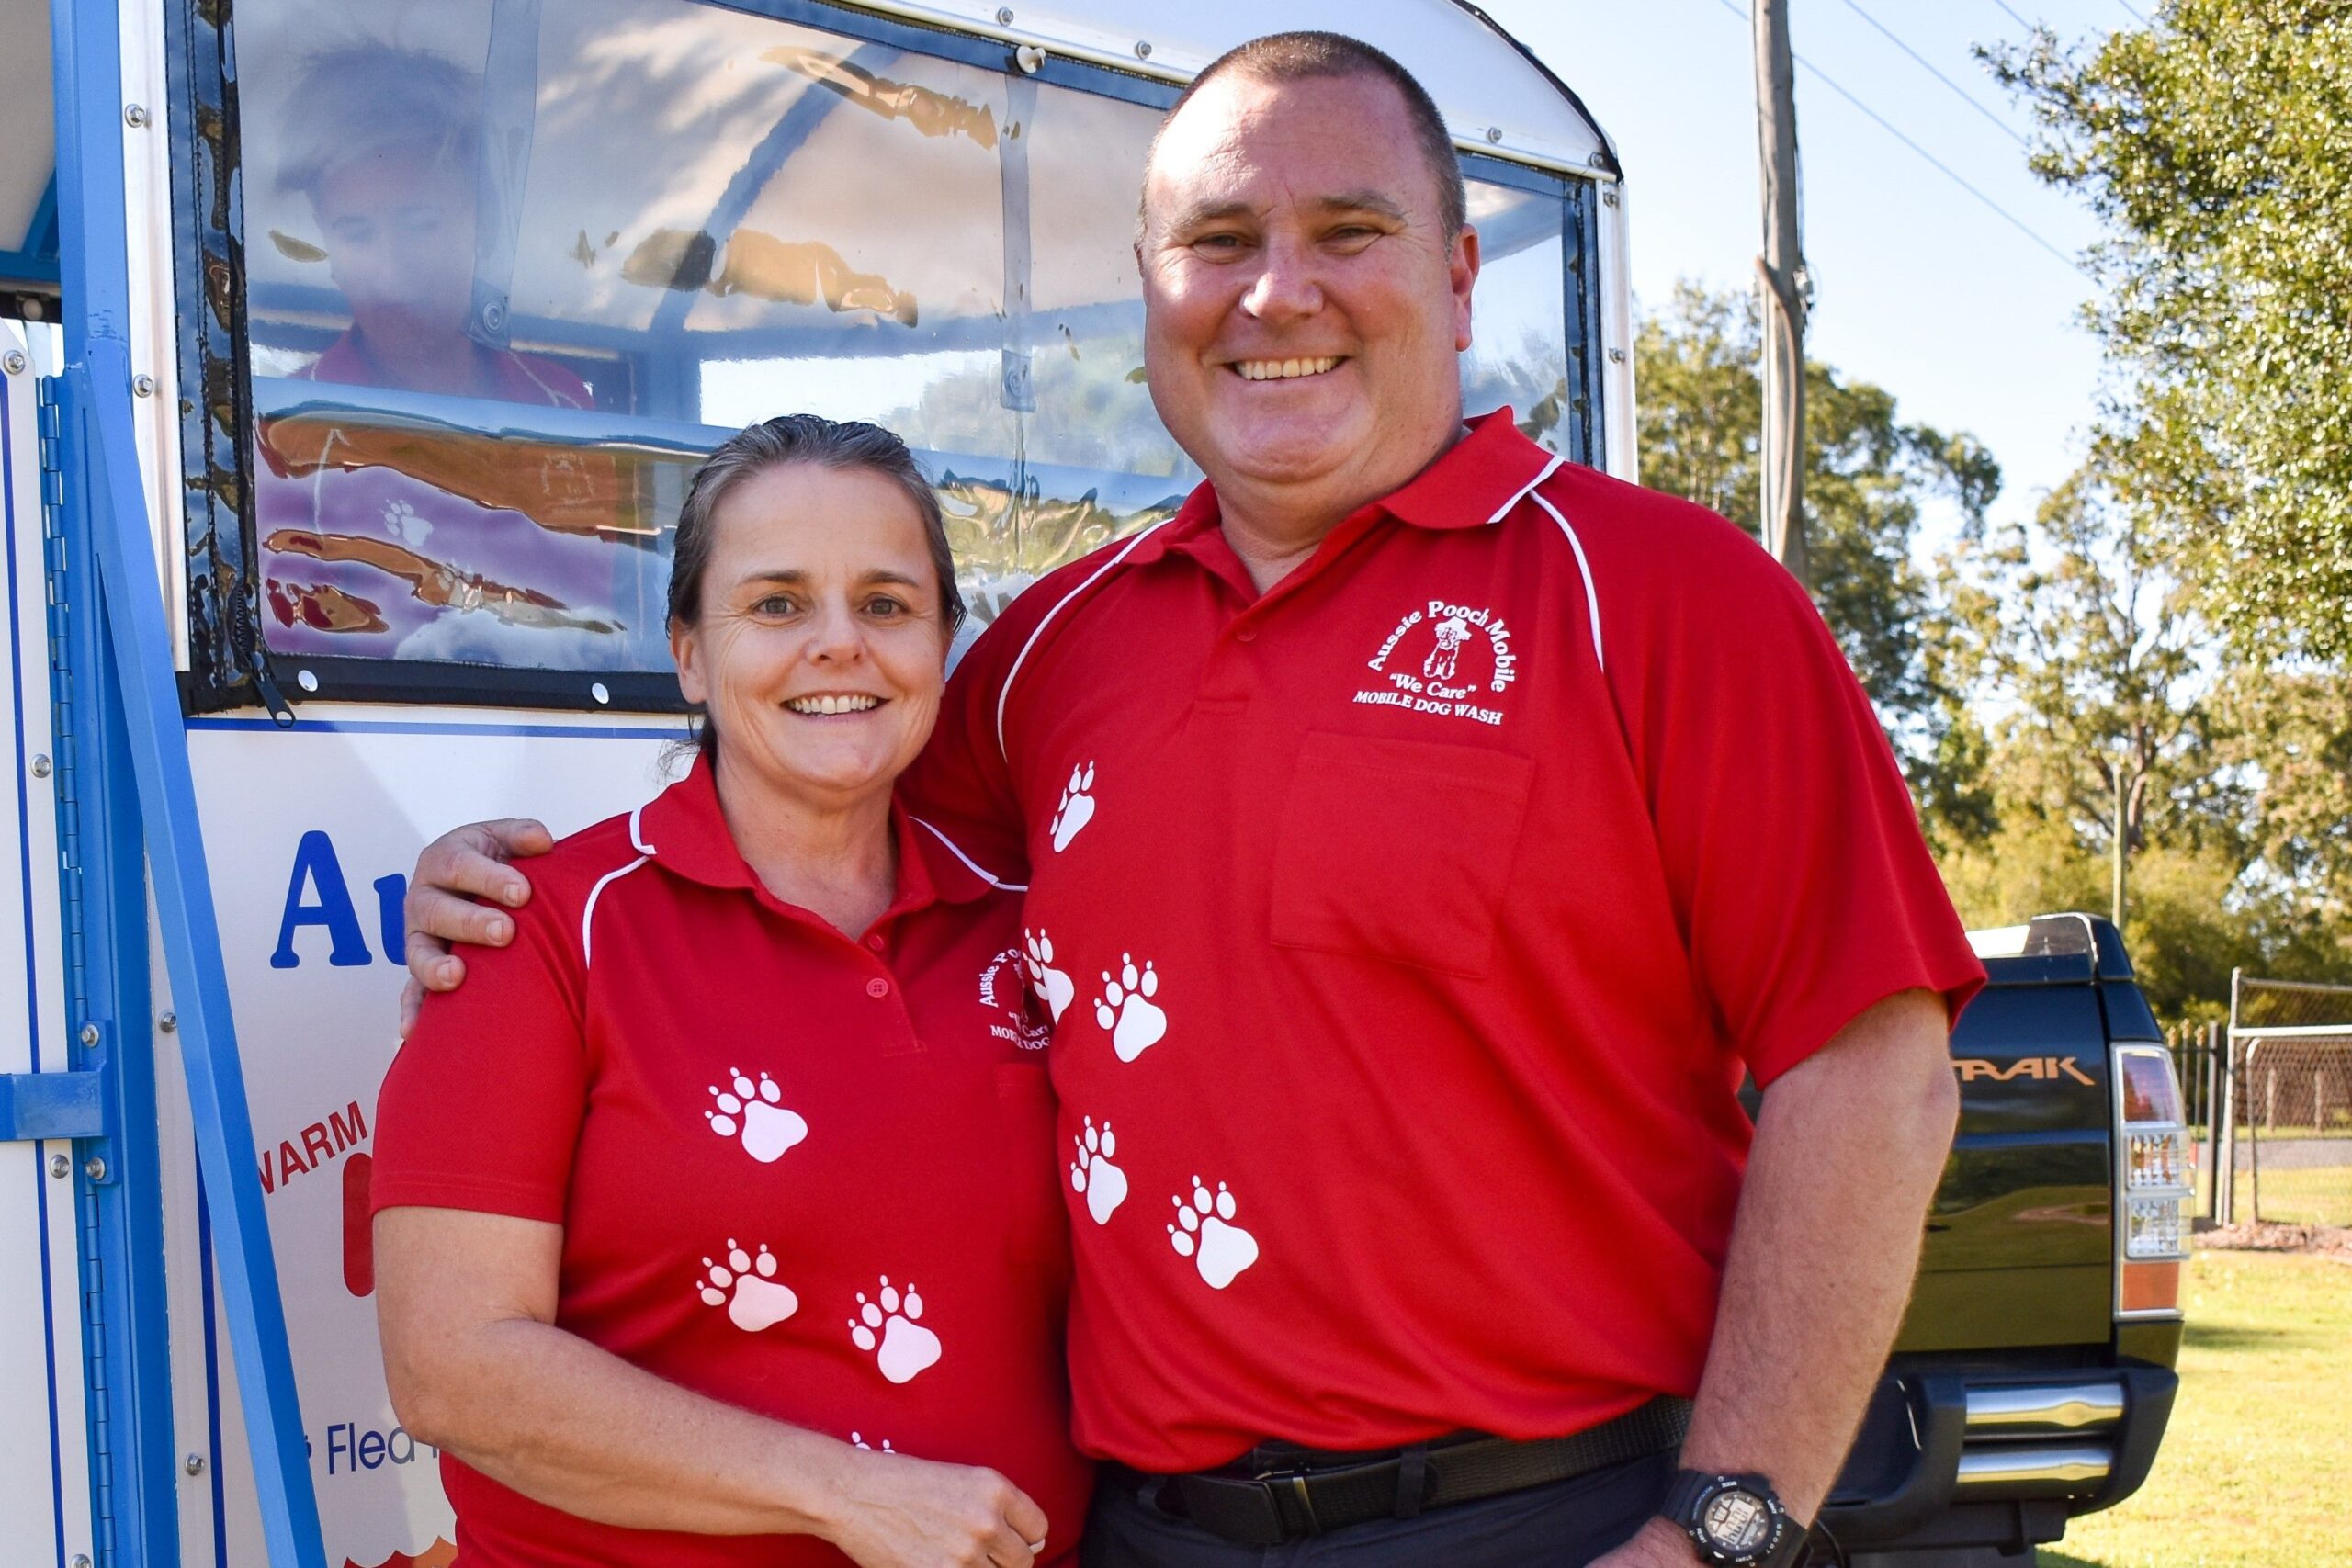 Aussie Pooch Mobile awarded 5 stars